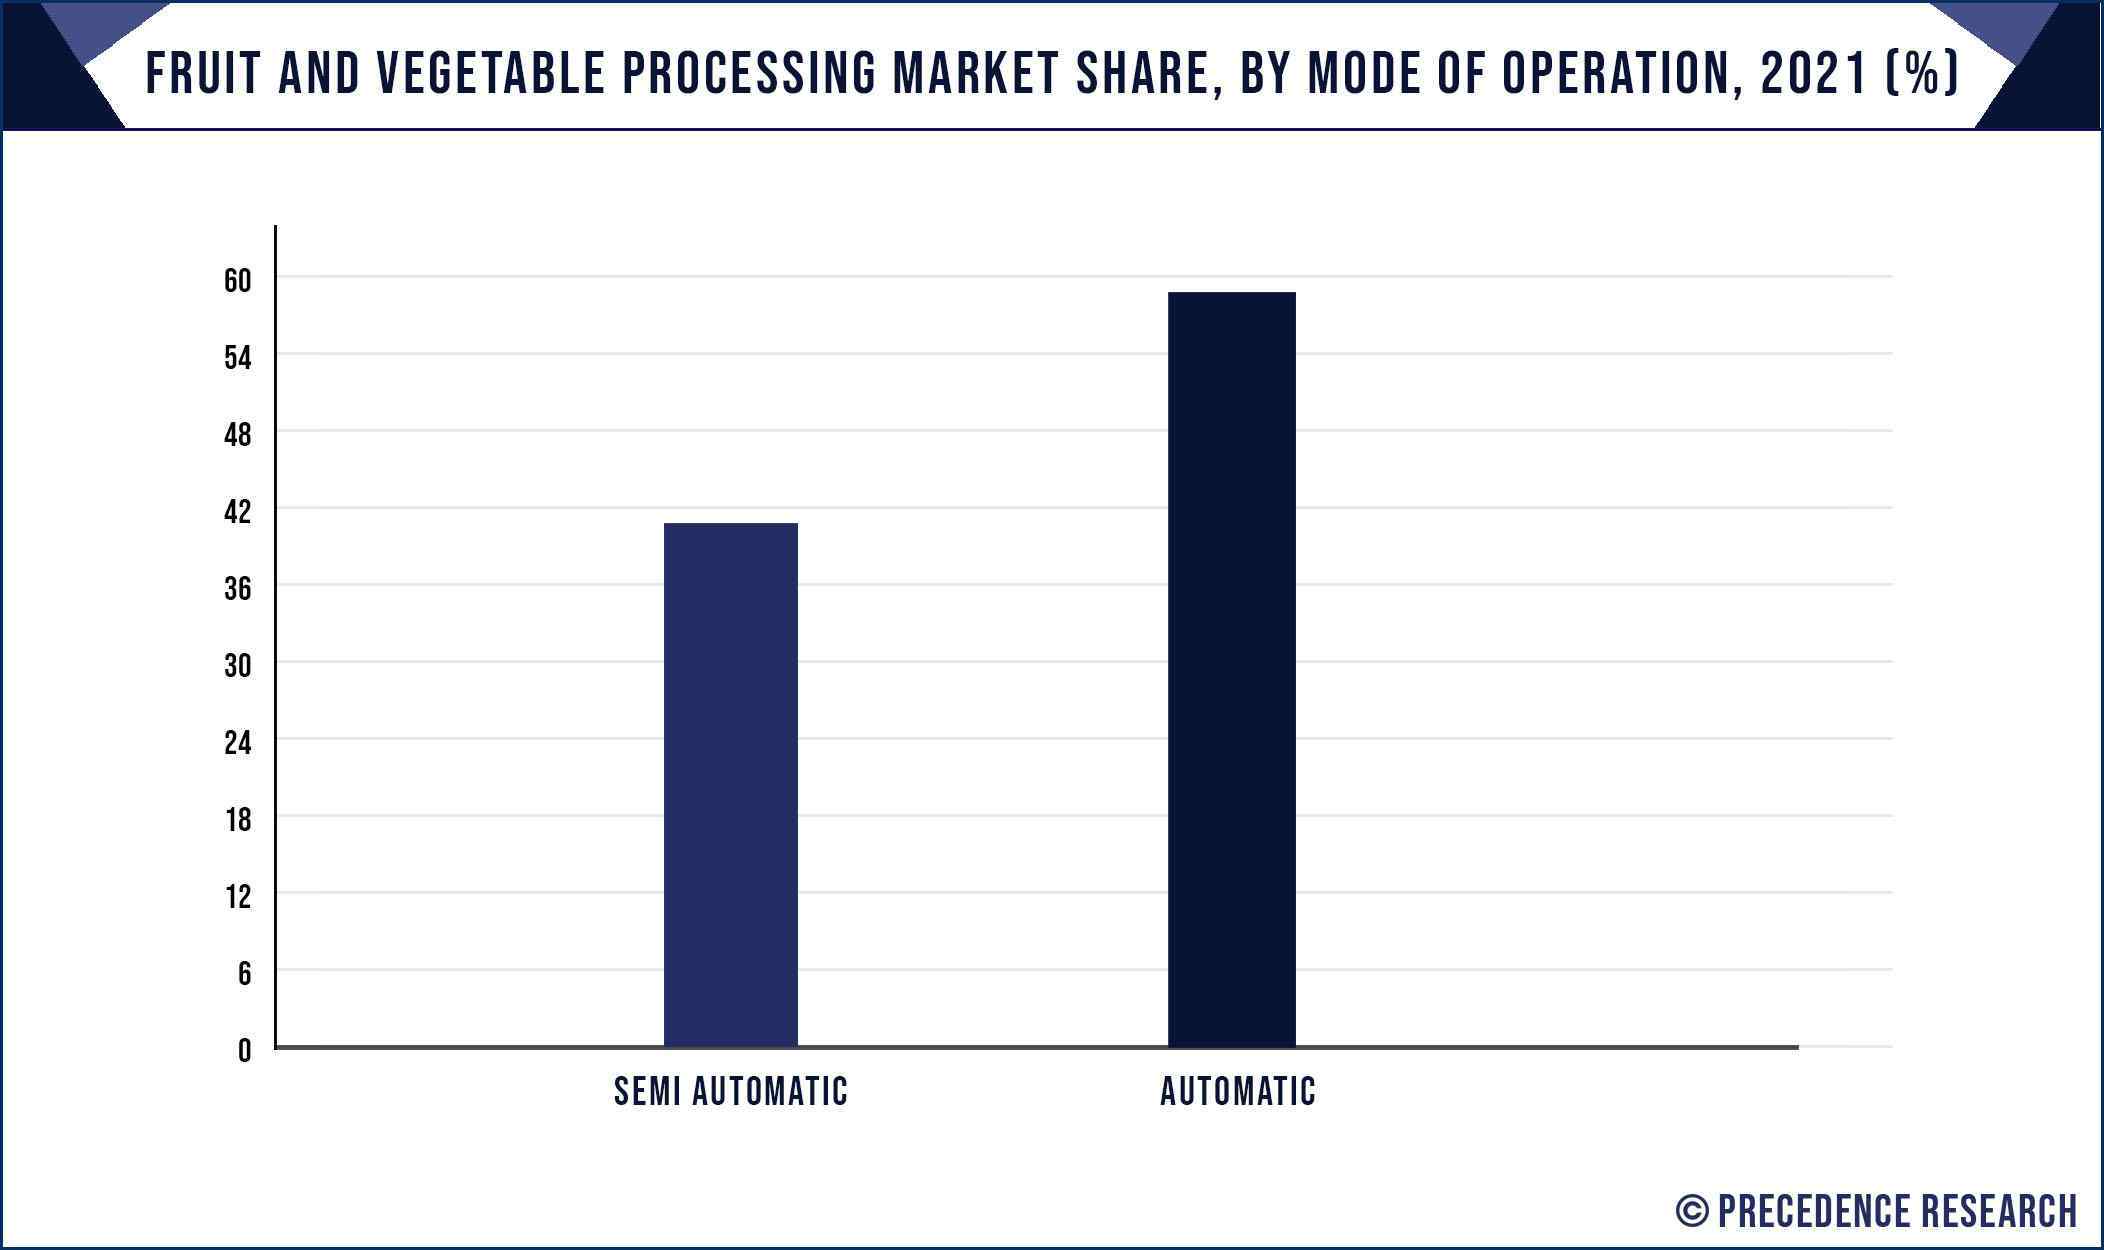 Fruit and Vegetable Processing Market Share, By Mode of Operation, 2021 (%)